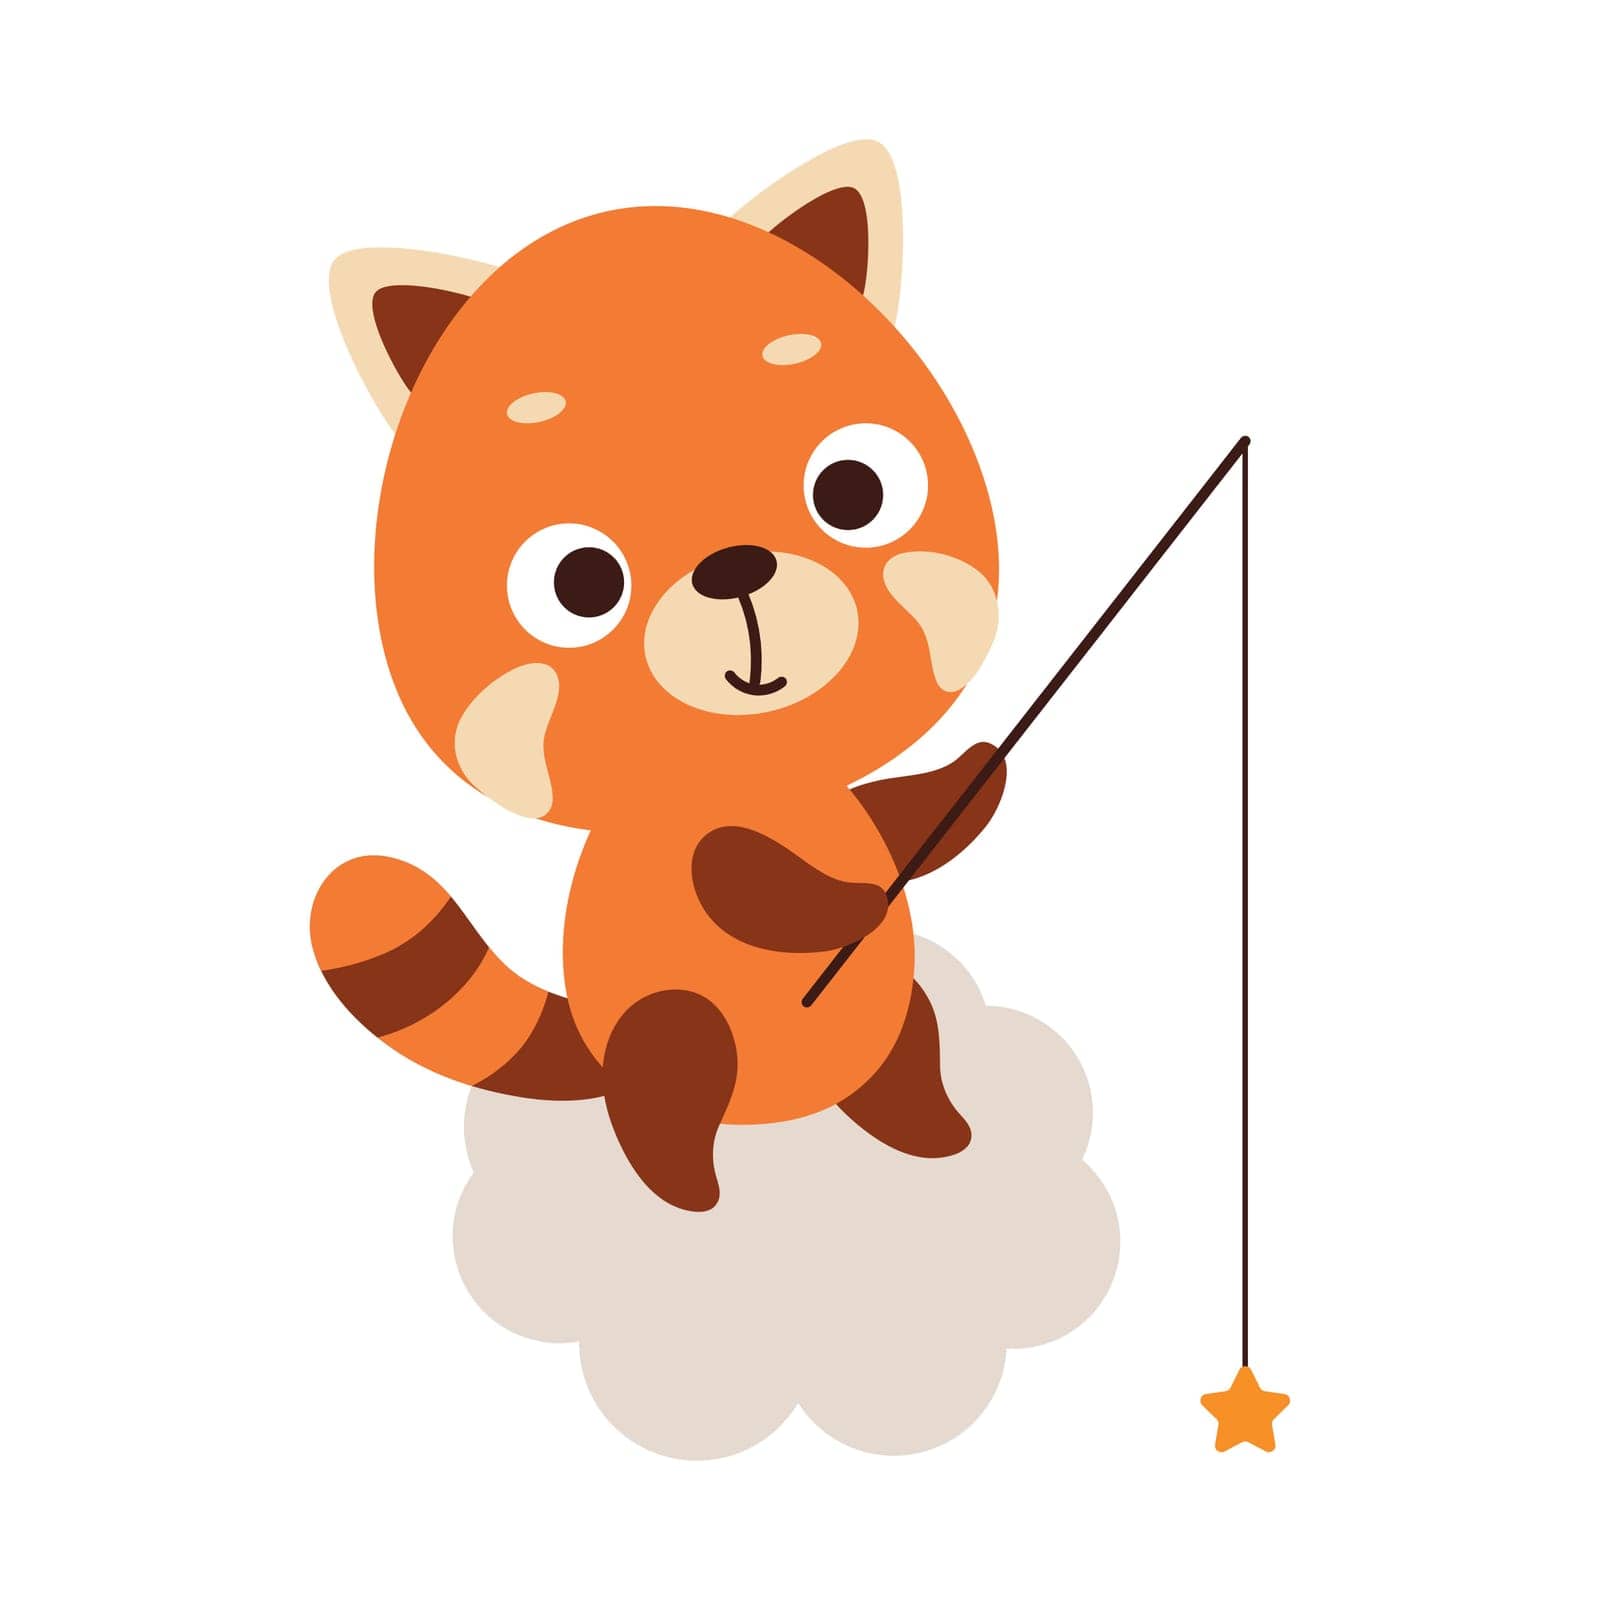 Cute little red panda fishing star on cloud. Cartoon animal character for kids t-shirt, nursery decoration, baby shower, greeting cards, invitations, house interior. Vector stock illustration